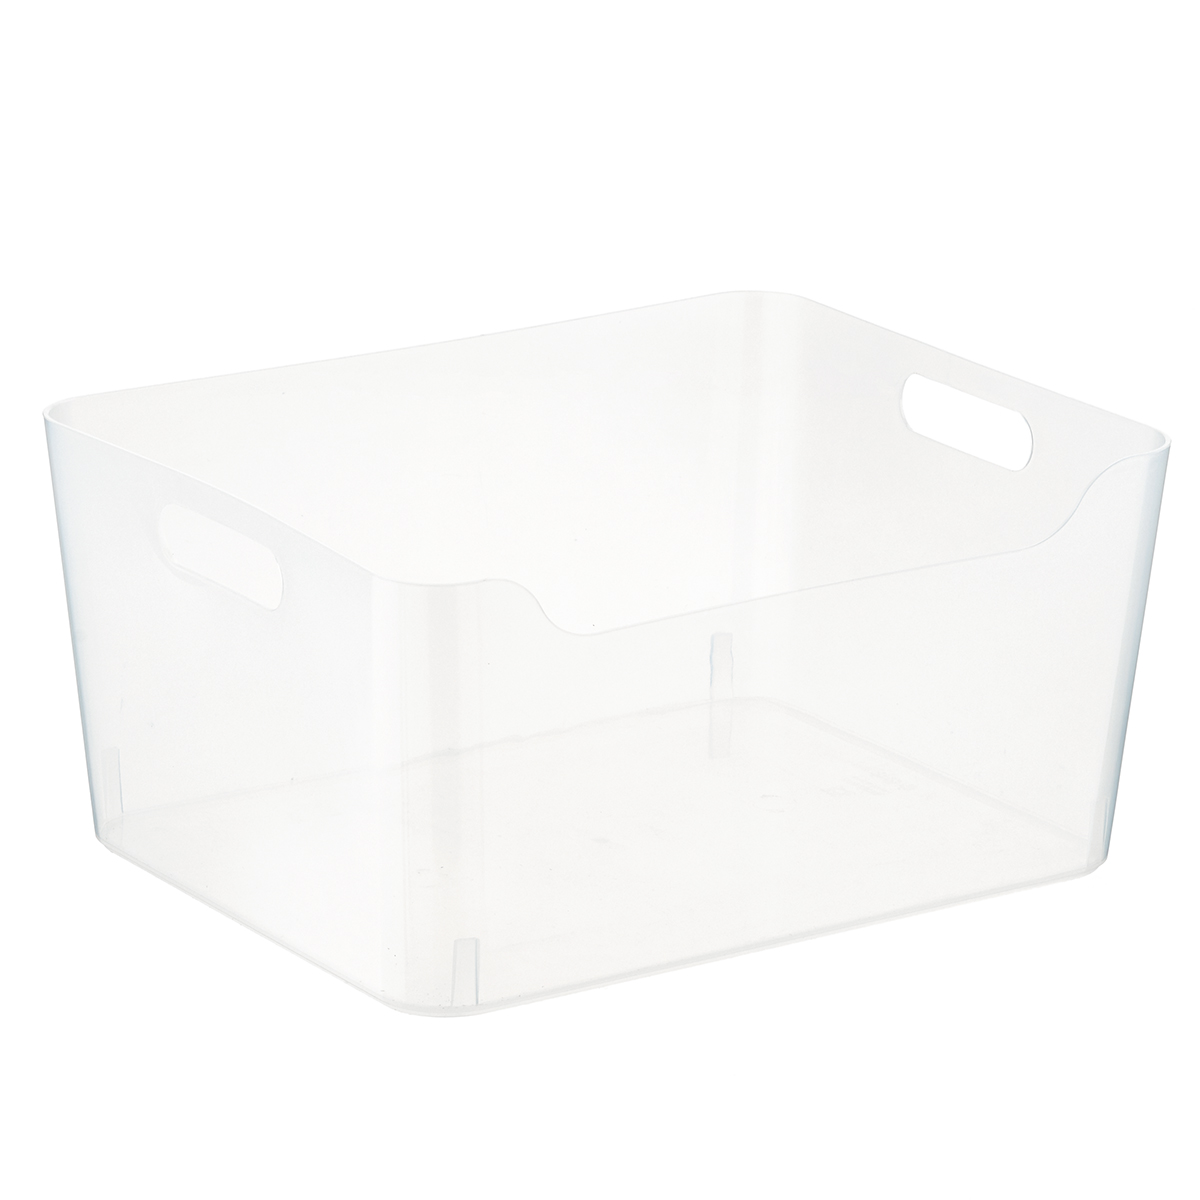 Large Plastic Storage Bin with Handles, Clear, 14.25″ x 11.5625″ x 6.9375″  – Find Organizers That Fit